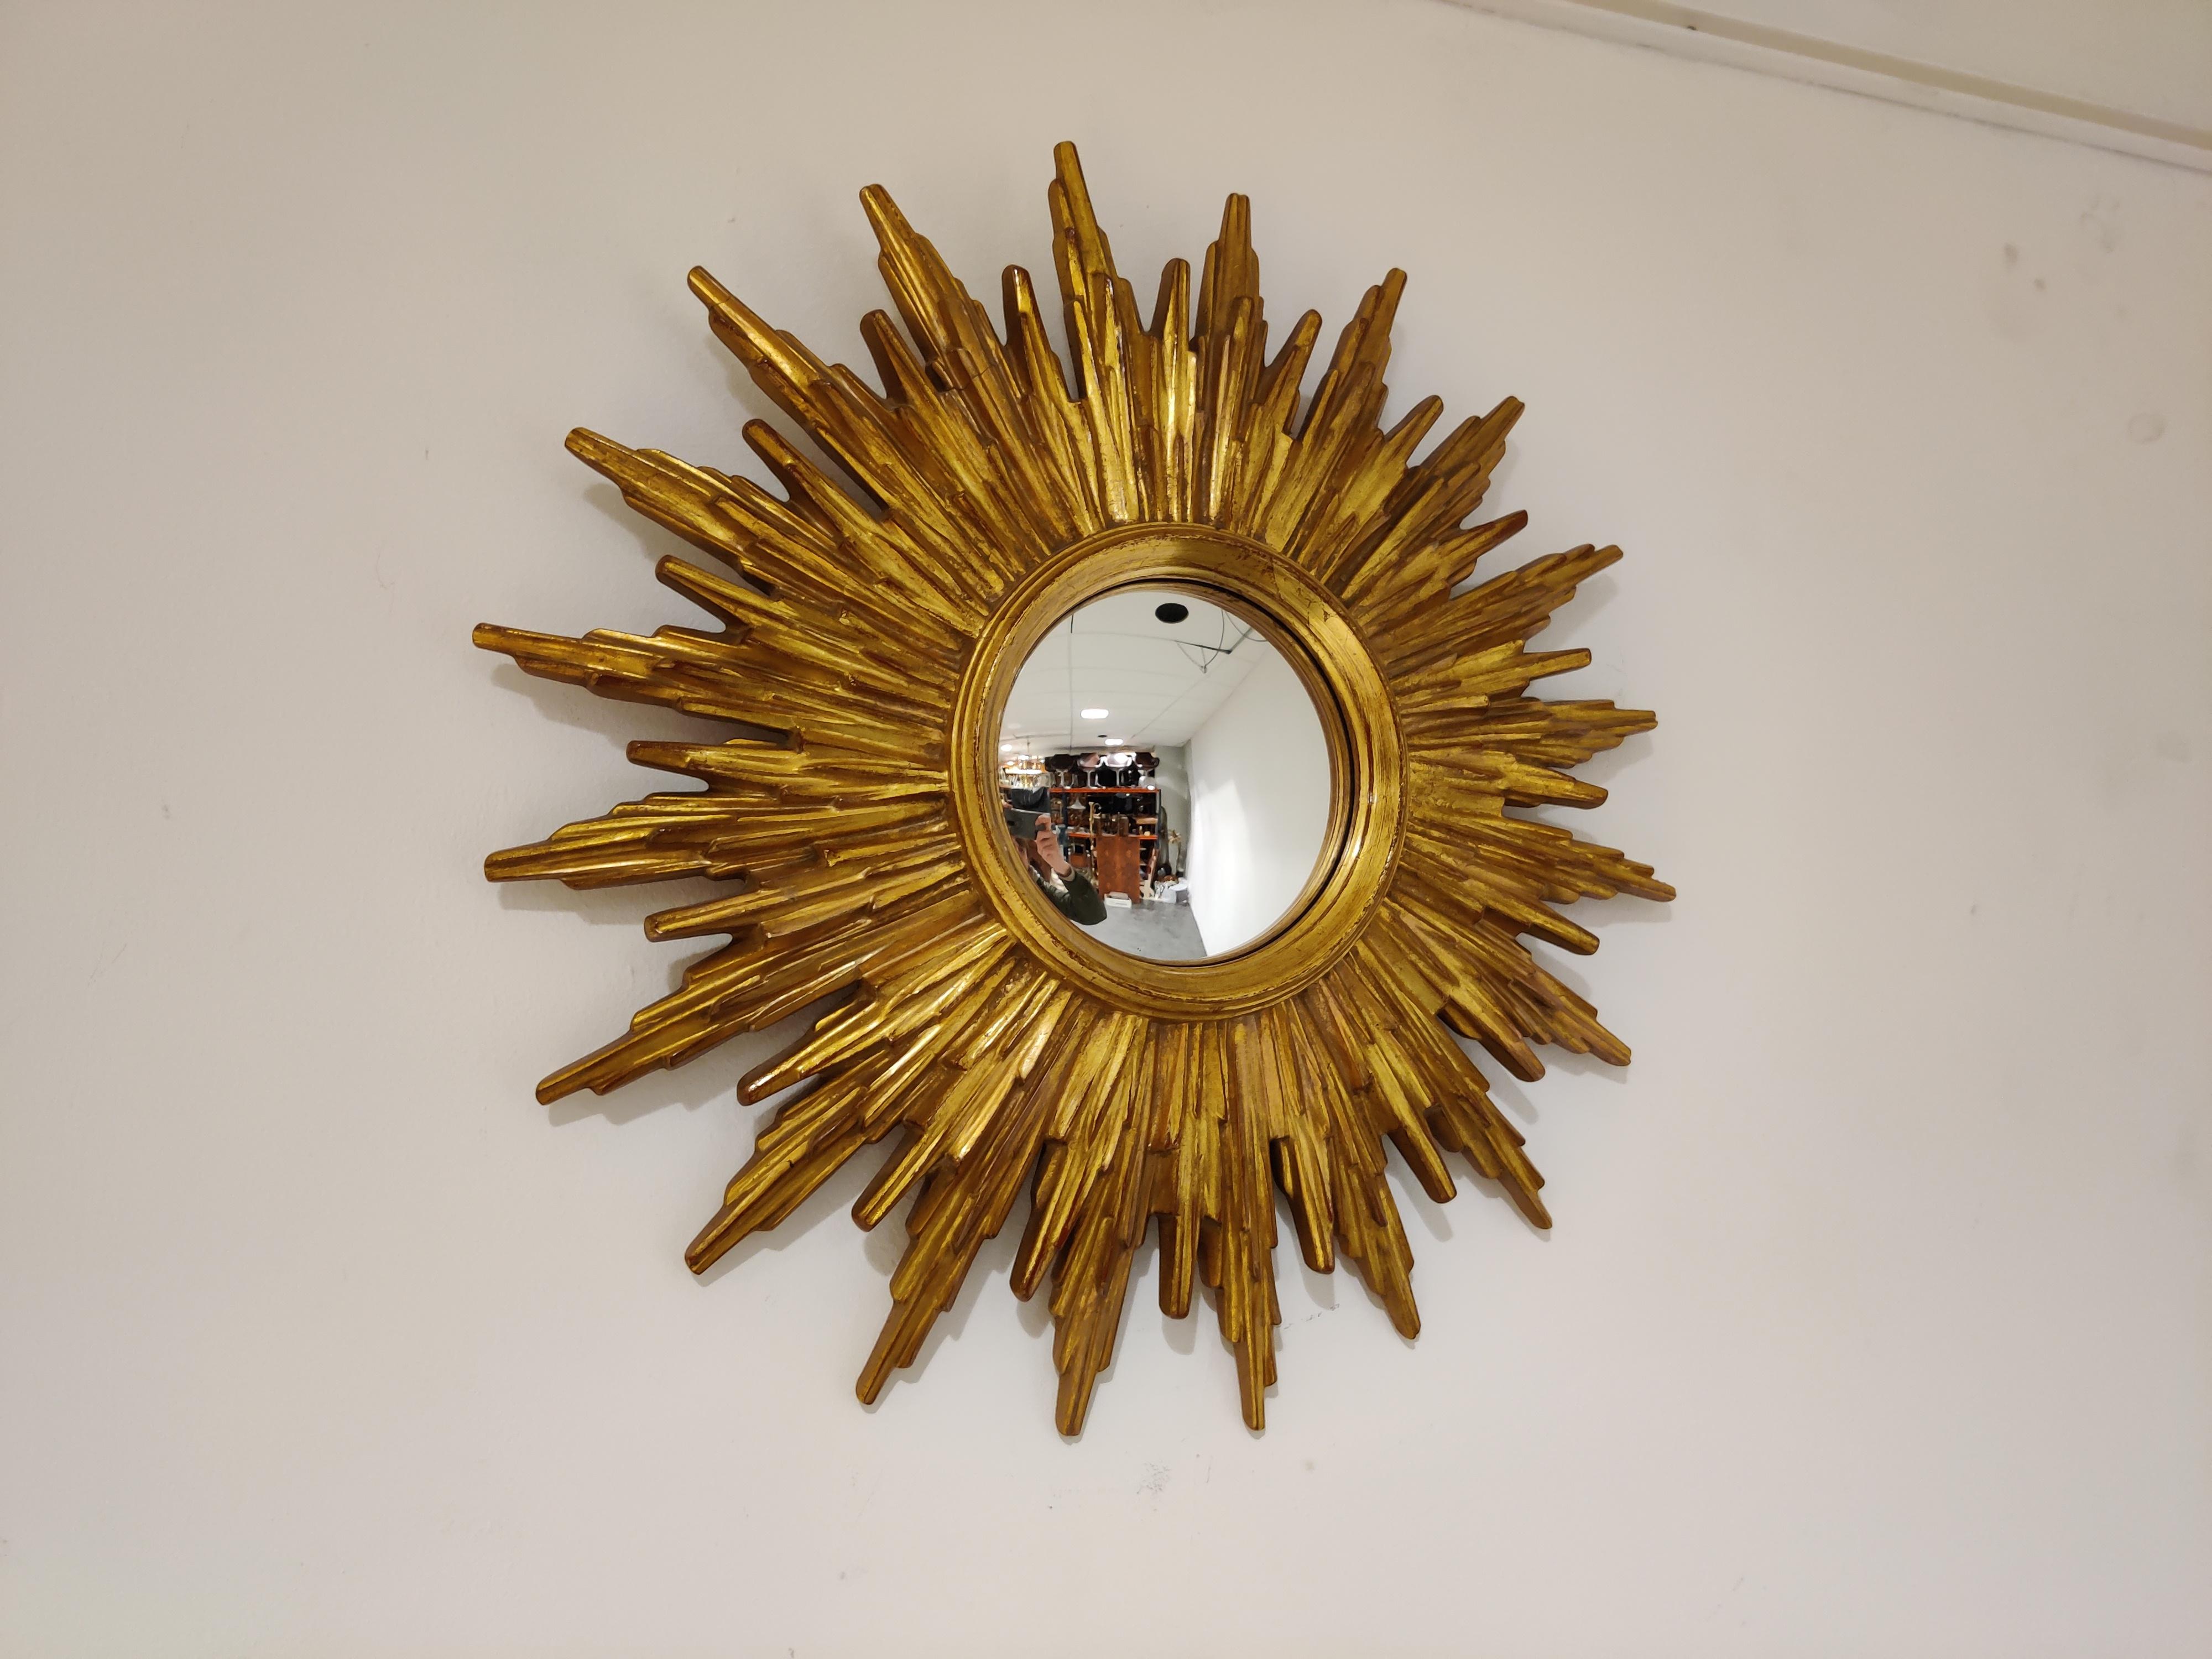 Gilded resin sunburst mirror with convex mirror glass.

The golden mirror is in a very good condition.

Beautiful eye catching design.

1960s - Belgium

Good condition.

Dimensions:

Diameter 46cm/18.11